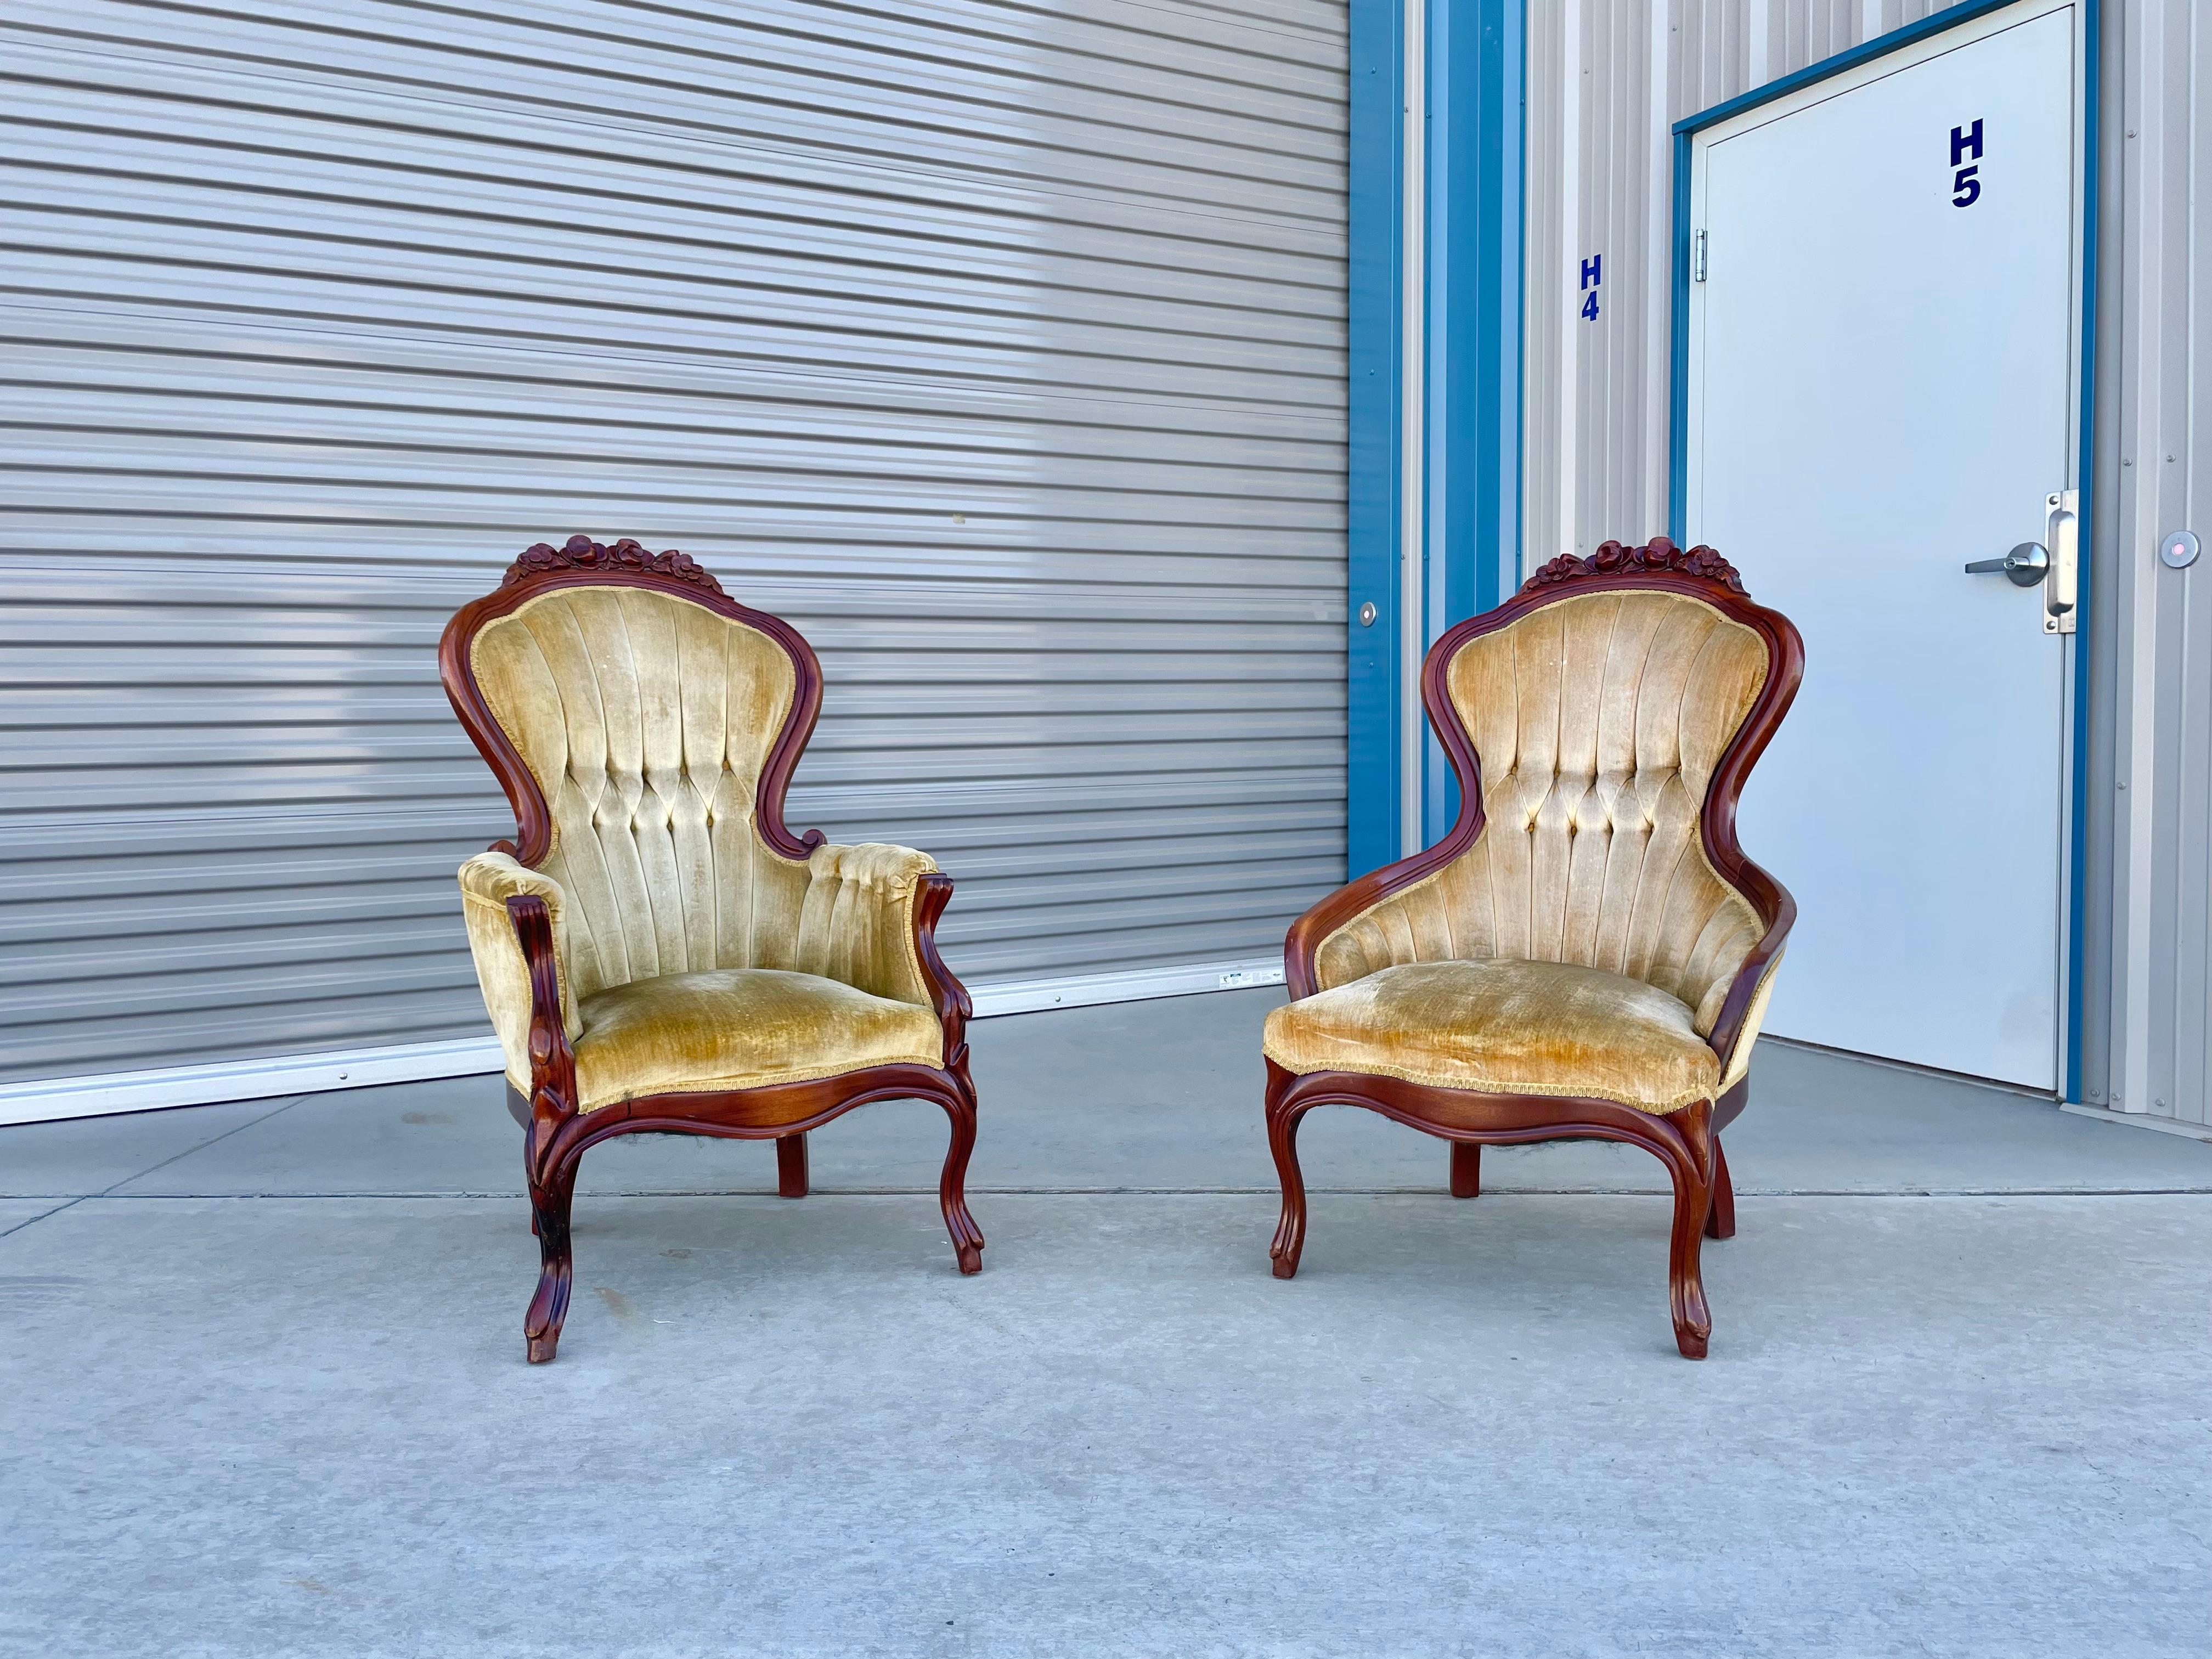 Vintage pair of Victorian-style chairs designed and manufactured by Kimball circa 1930s. The chair features a beautiful, unique sculpture design on the mahogany frame. The chairs also feature their original fabric, the perfect addition to your home.